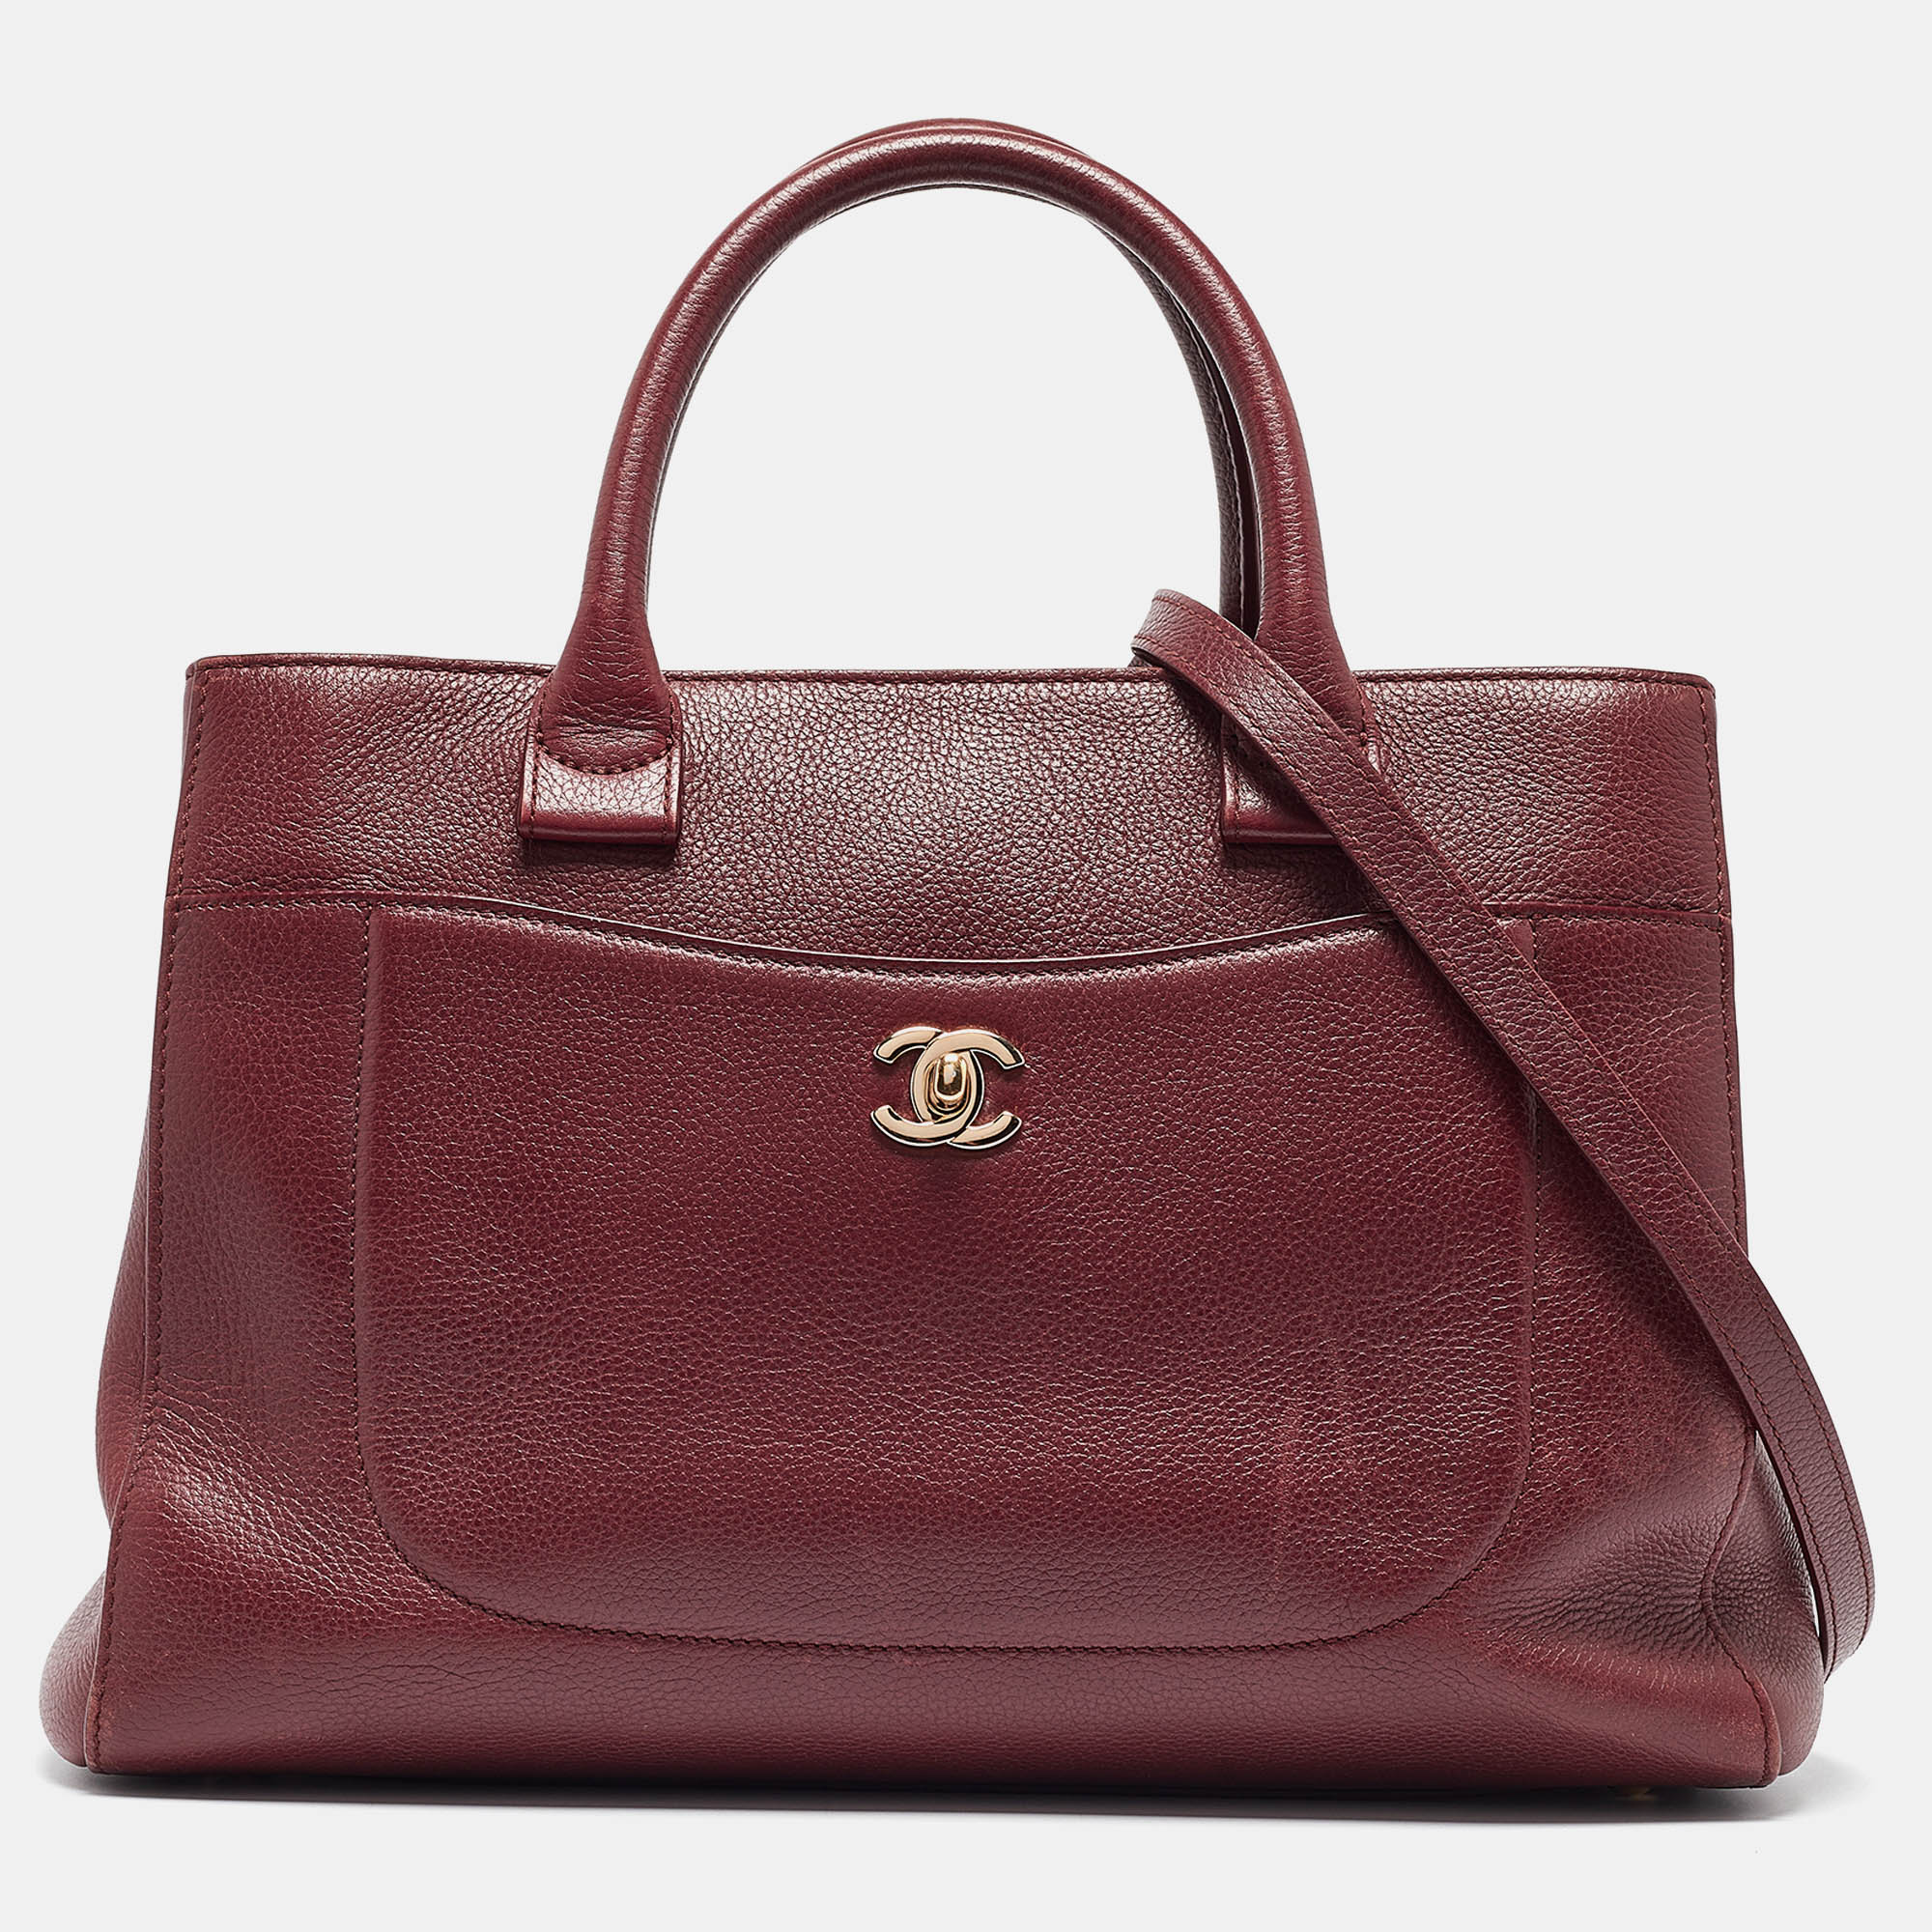 

Chanel Burgundy Leather Small Neo Executive Shopper Tote